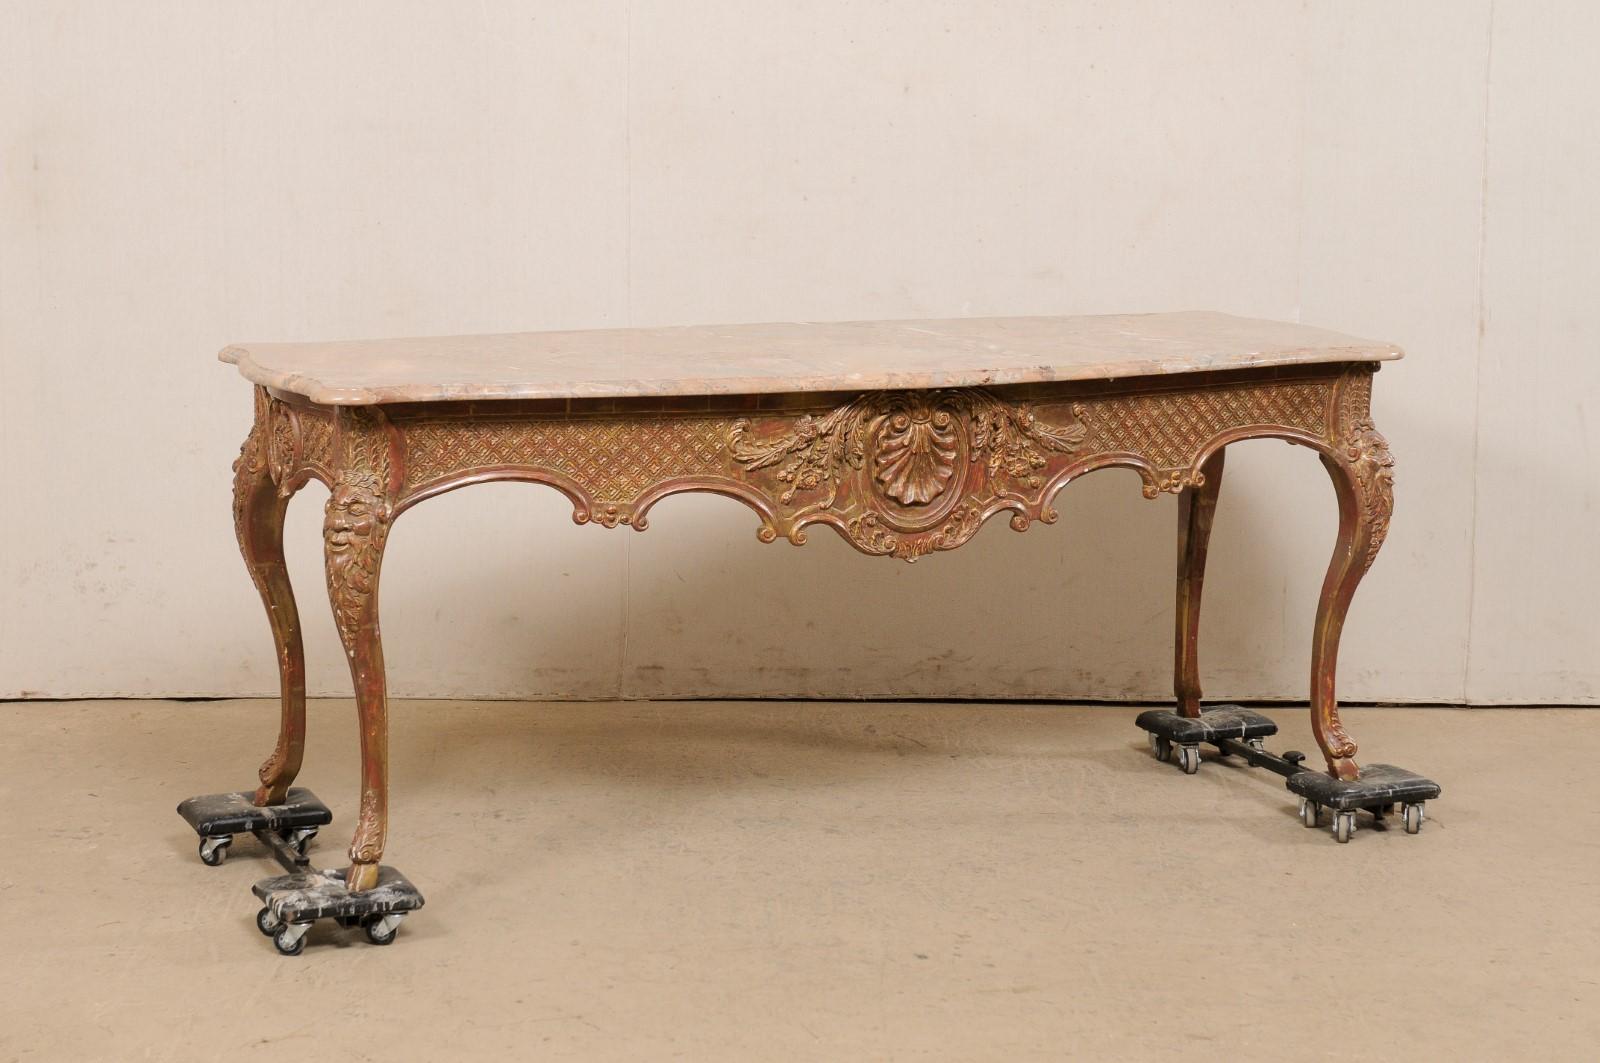 A French ornately carved-wood center table with shapely marble top. This vintage table from France is nicely sized at approximately 6.75 feet in length. The mostly rectangular shaped marble top is gracefully bowed along either long end, has rounded